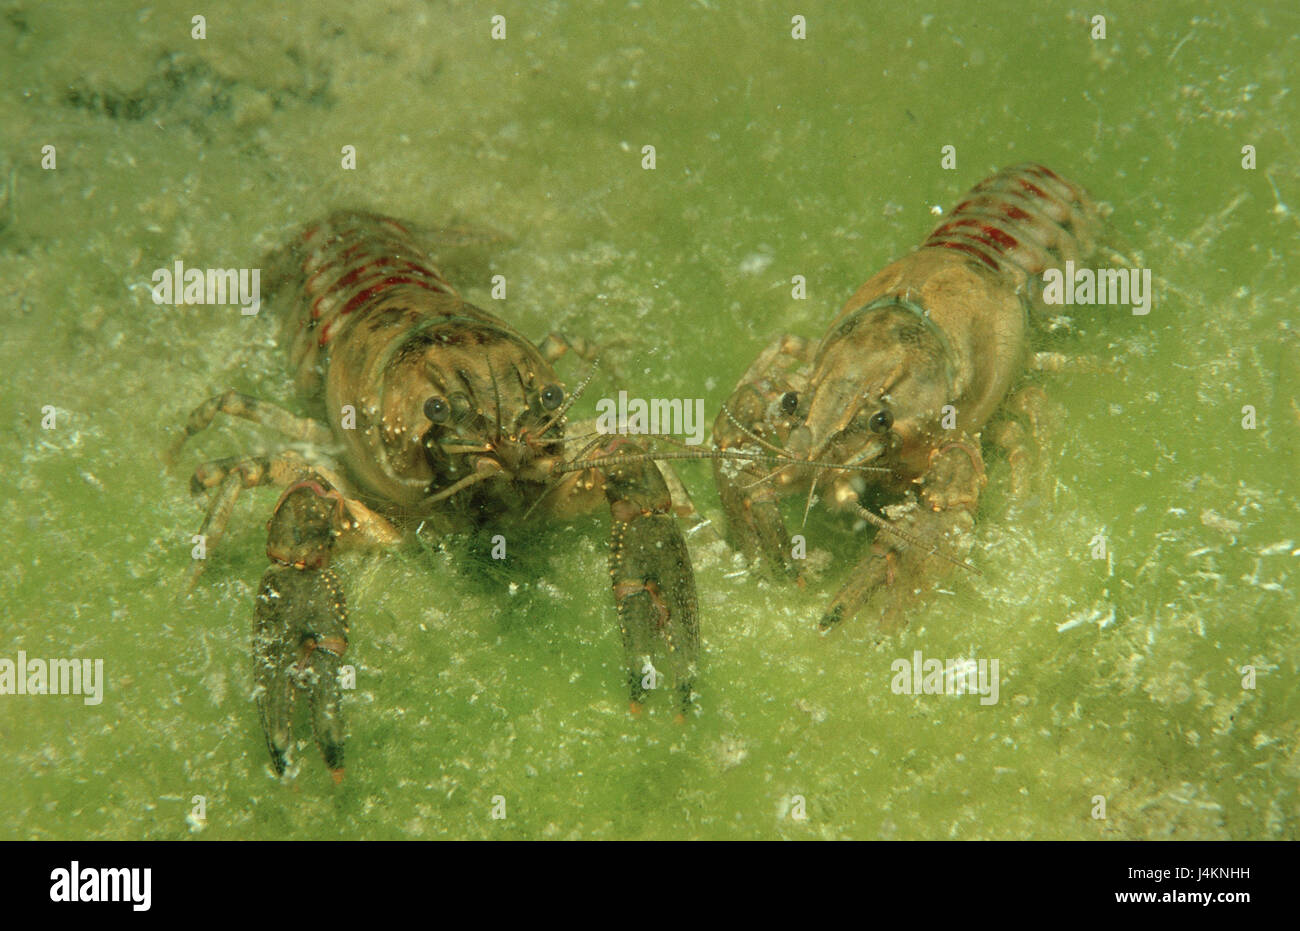 two crayfishes, Astacus astacus, in pairs, Stock Photo